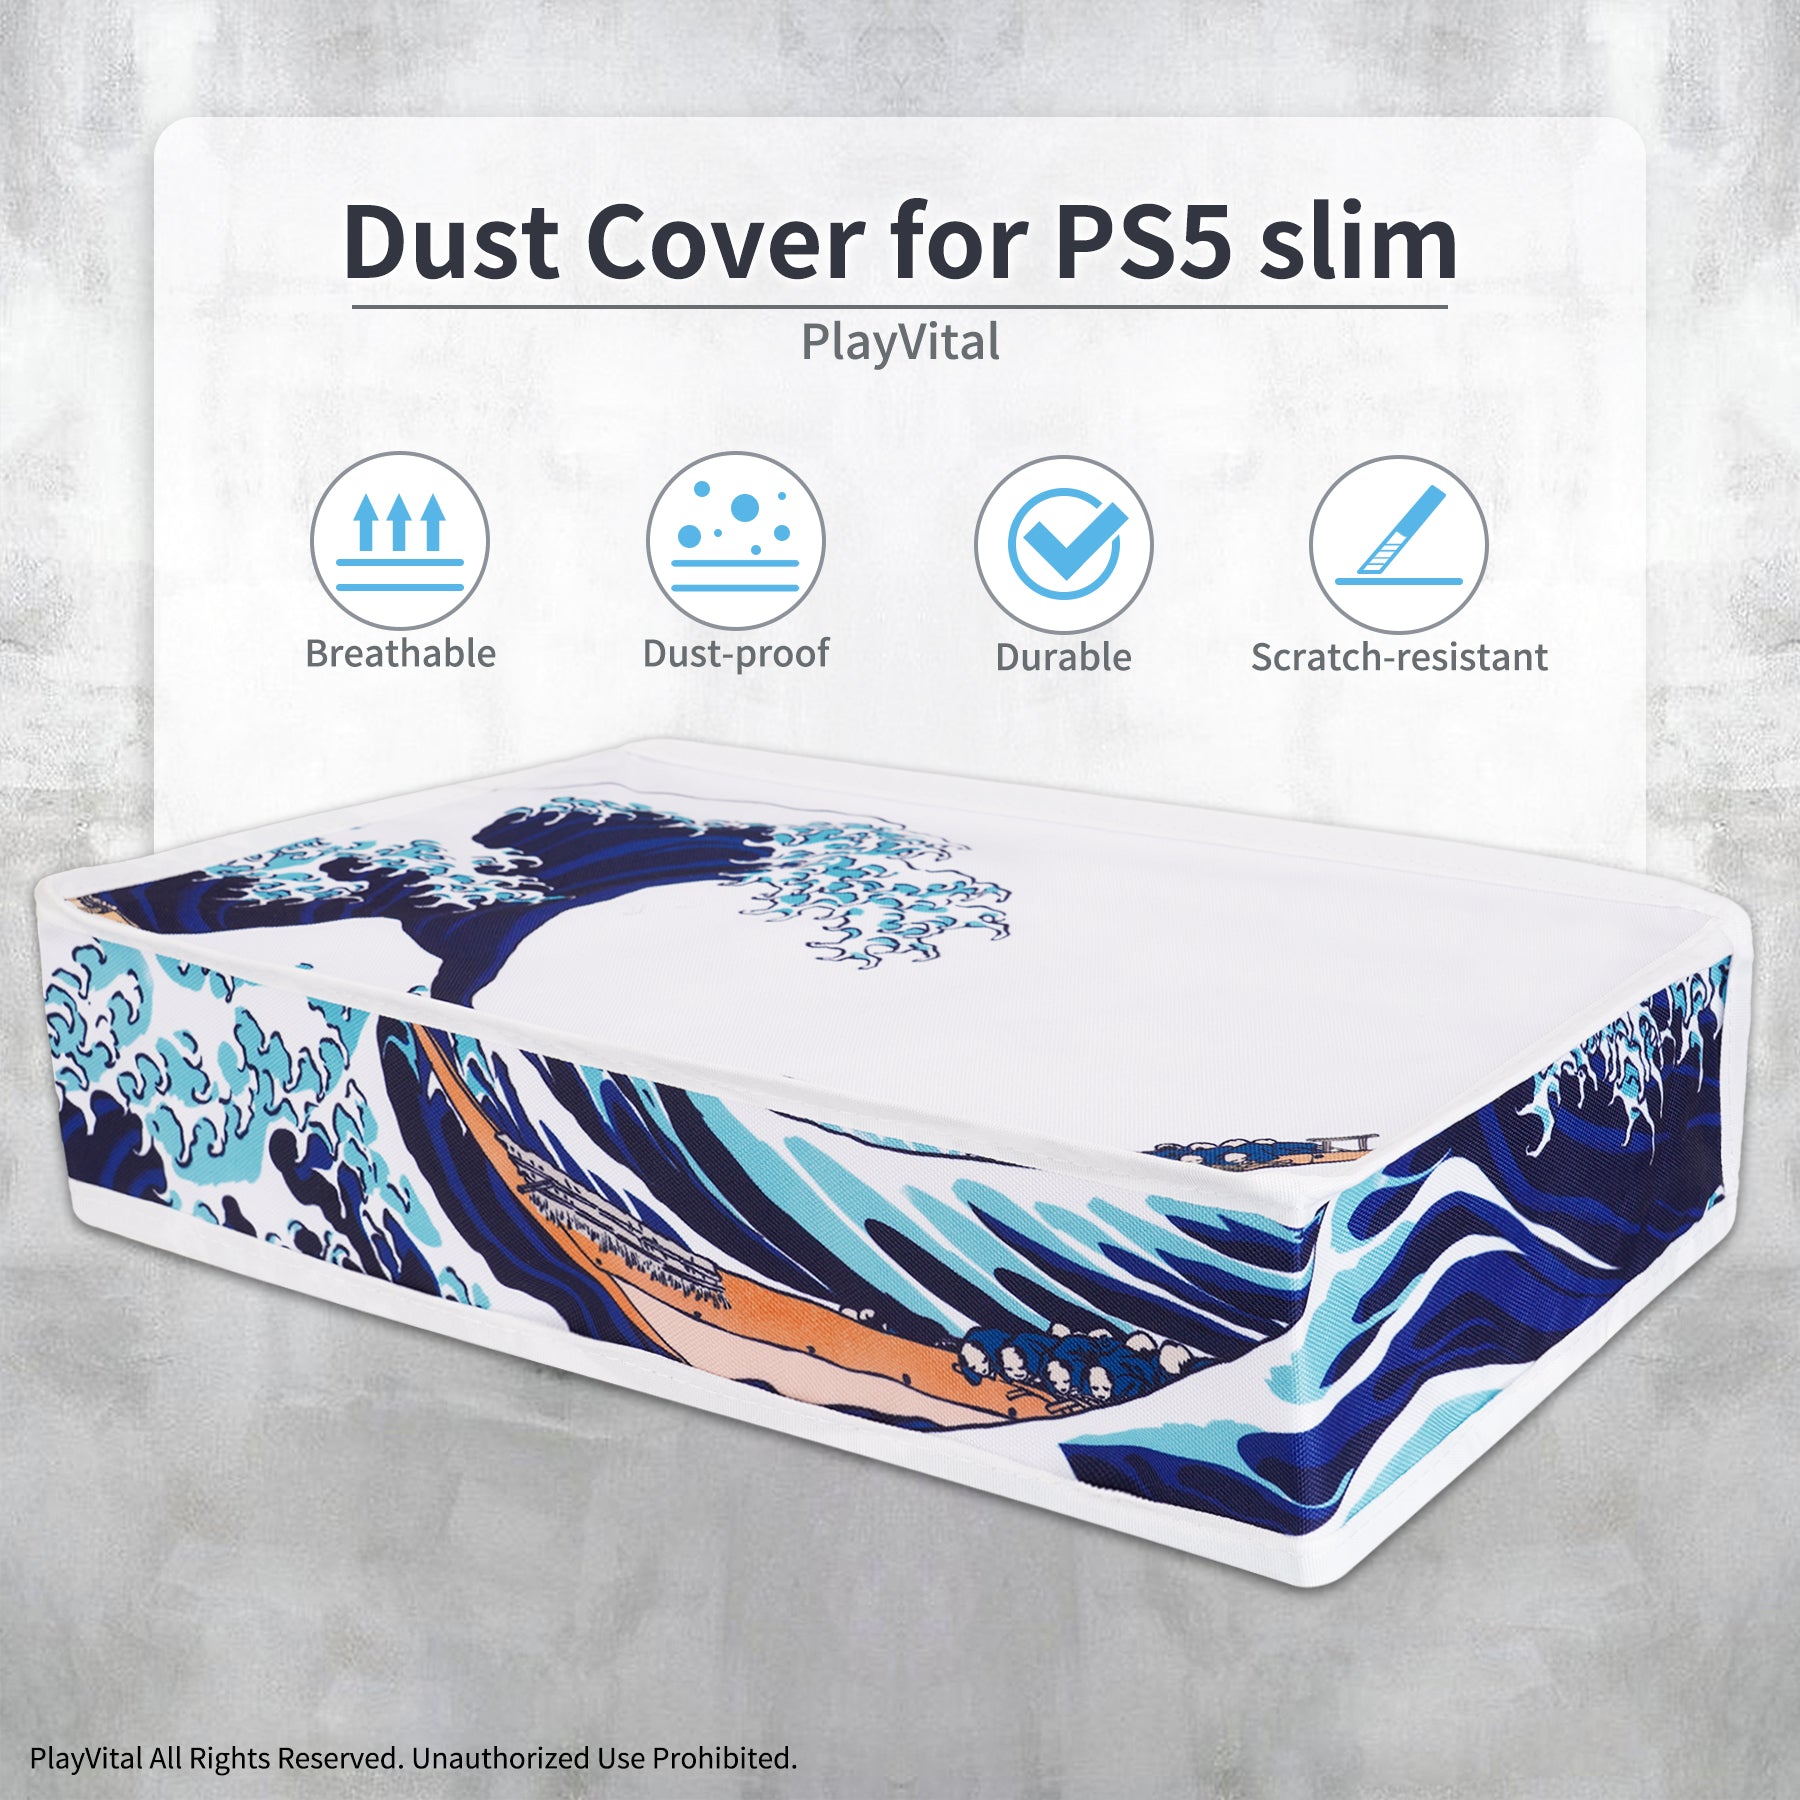 PlayVital Horizontal Dust Cover for ps5 Slim Digital Edition(The New Smaller Design), Nylon Dust Proof Protector Waterproof Cover Sleeve for ps5 Slim Console - The Great Wave - RTKPFH001 PlayVital